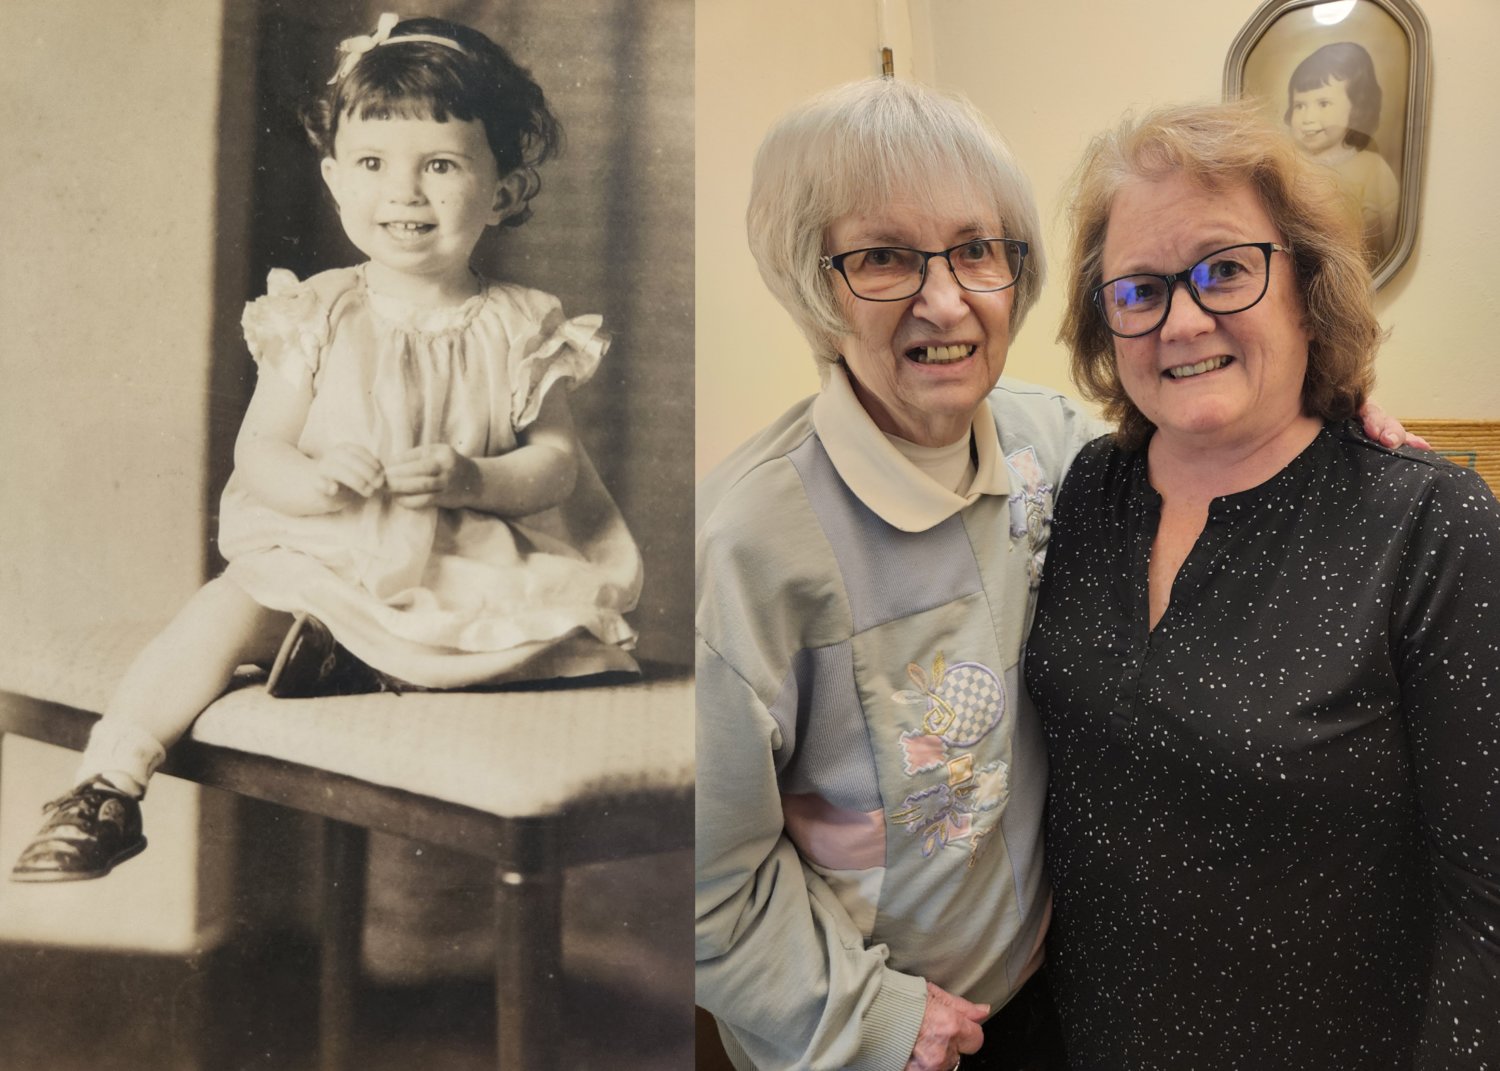 At left, A young Carol Matteson Ponder is pictured. At right, Carol Matteson Ponder, left, and daughter Marilyn Gallagher.